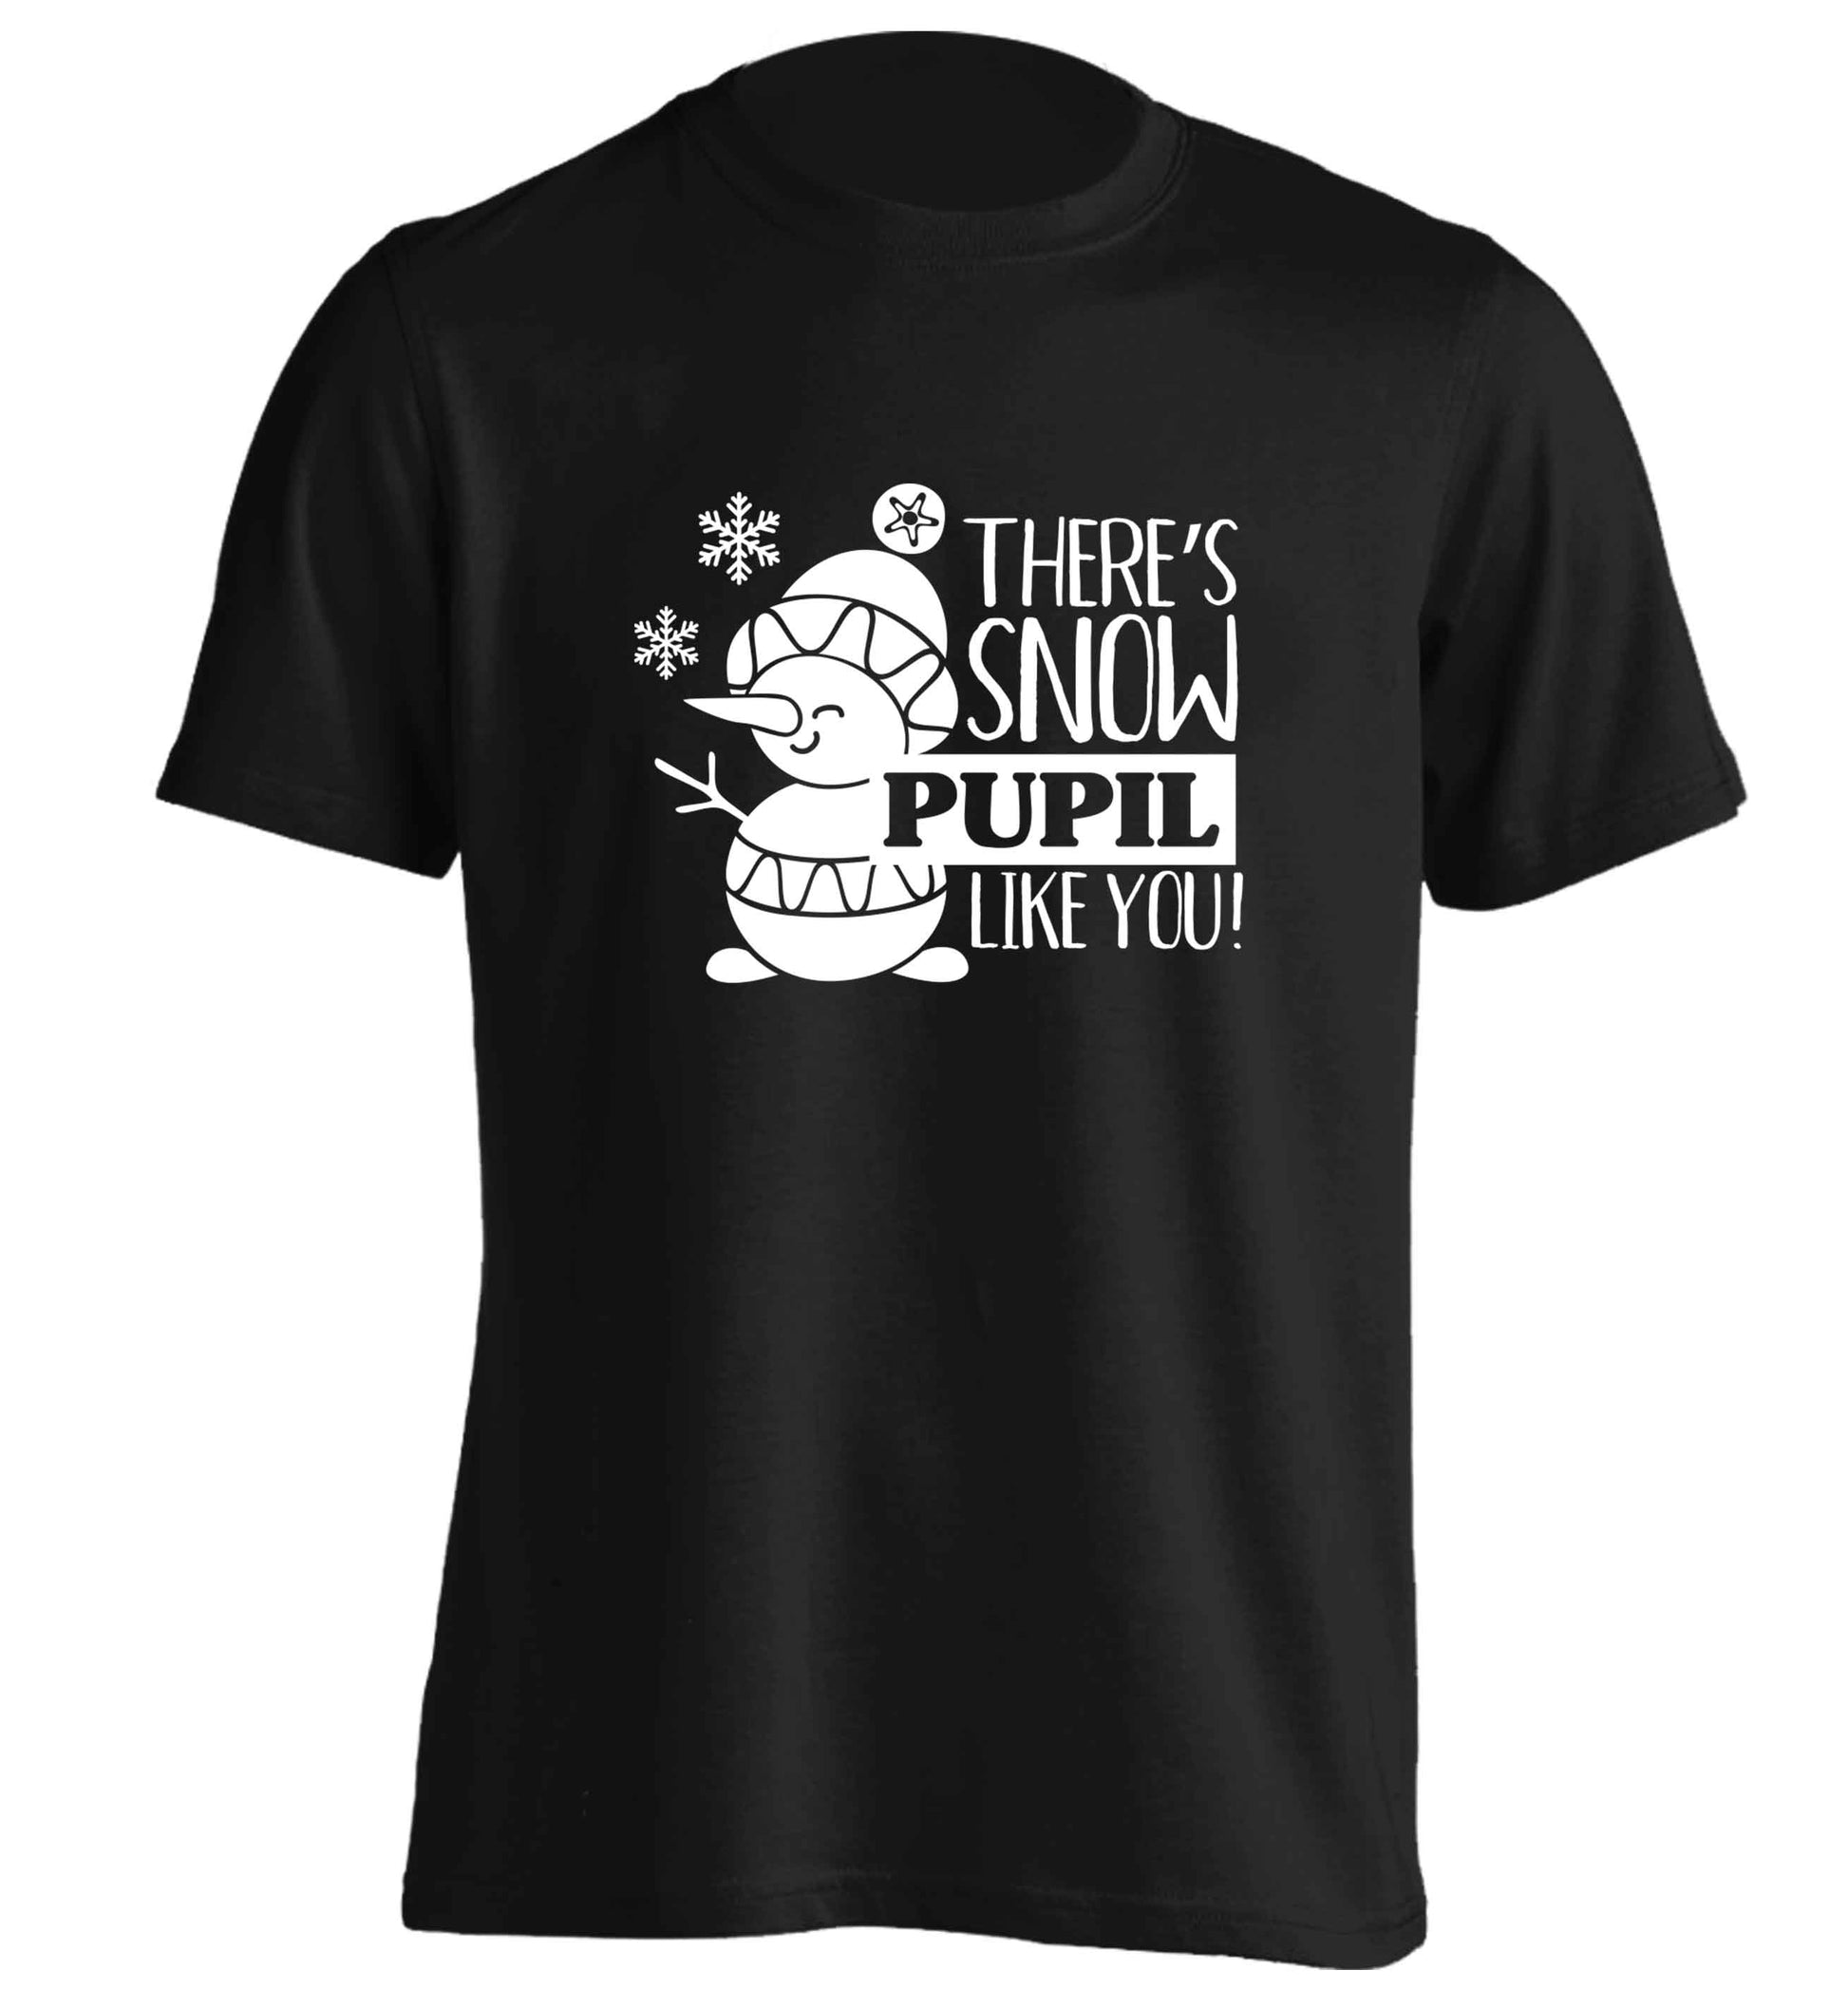 There's snow pupil like you adults unisex black Tshirt 2XL